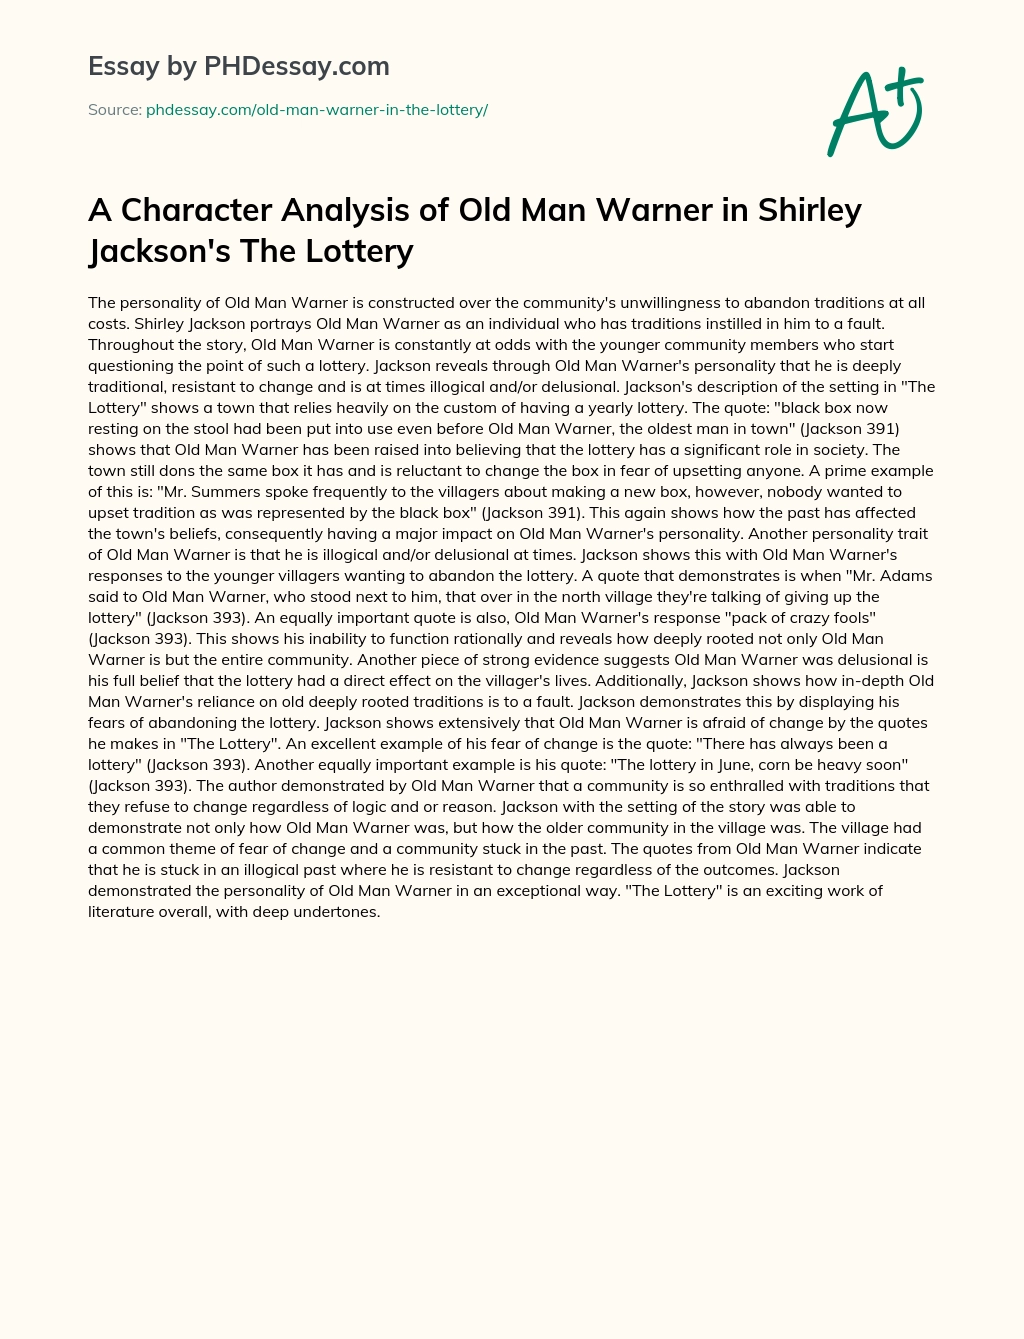 A Character Analysis of Old Man Warner in Shirley Jackson’s The Lottery essay